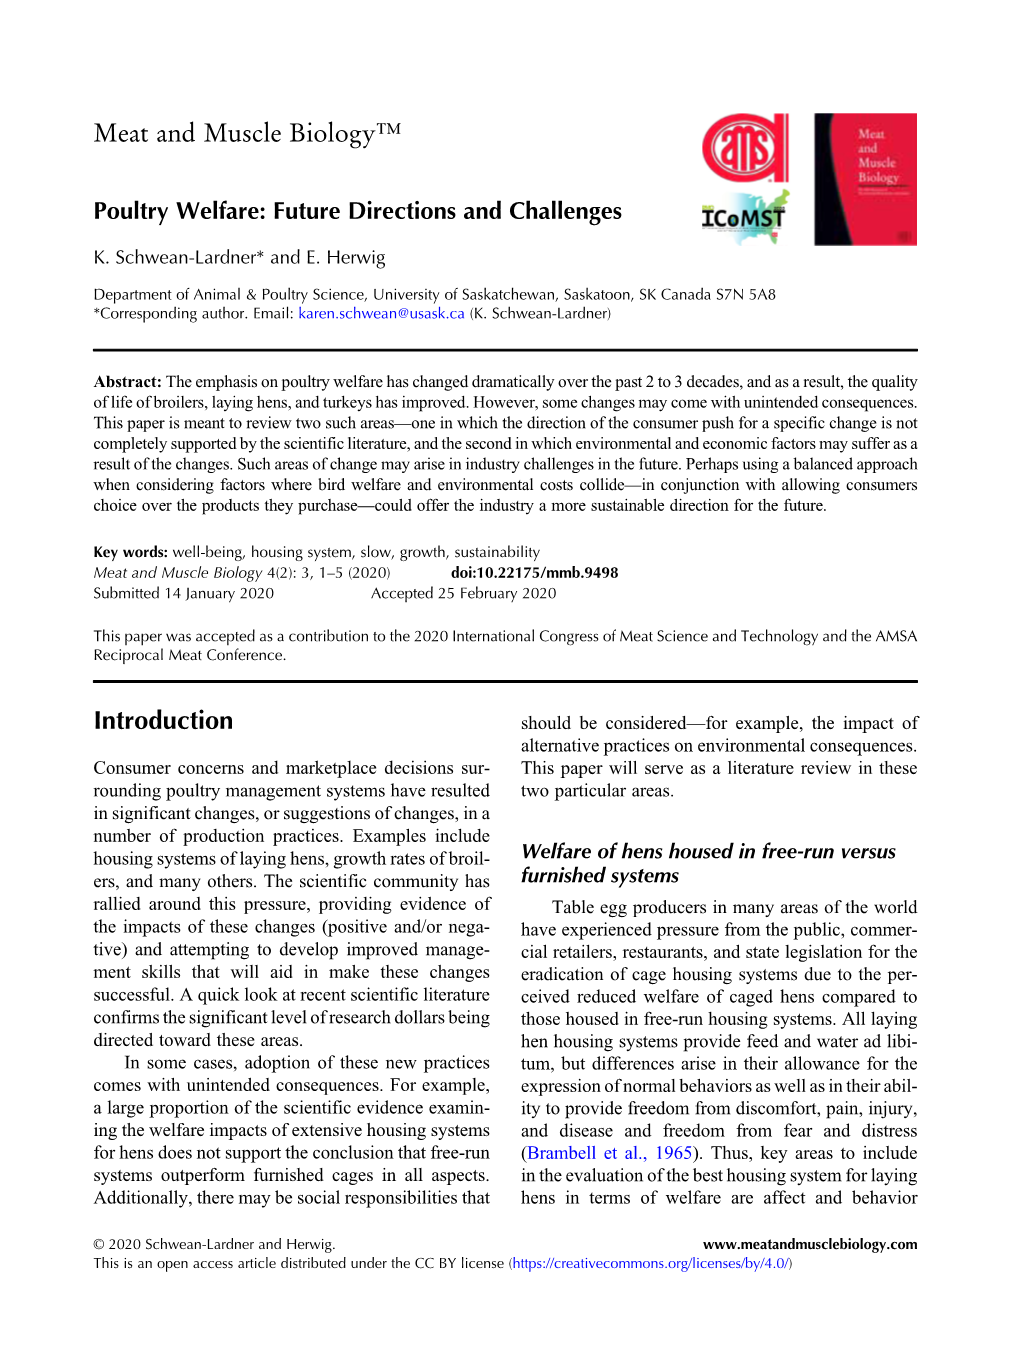 Poultry Welfare: Future Directions and Challenges